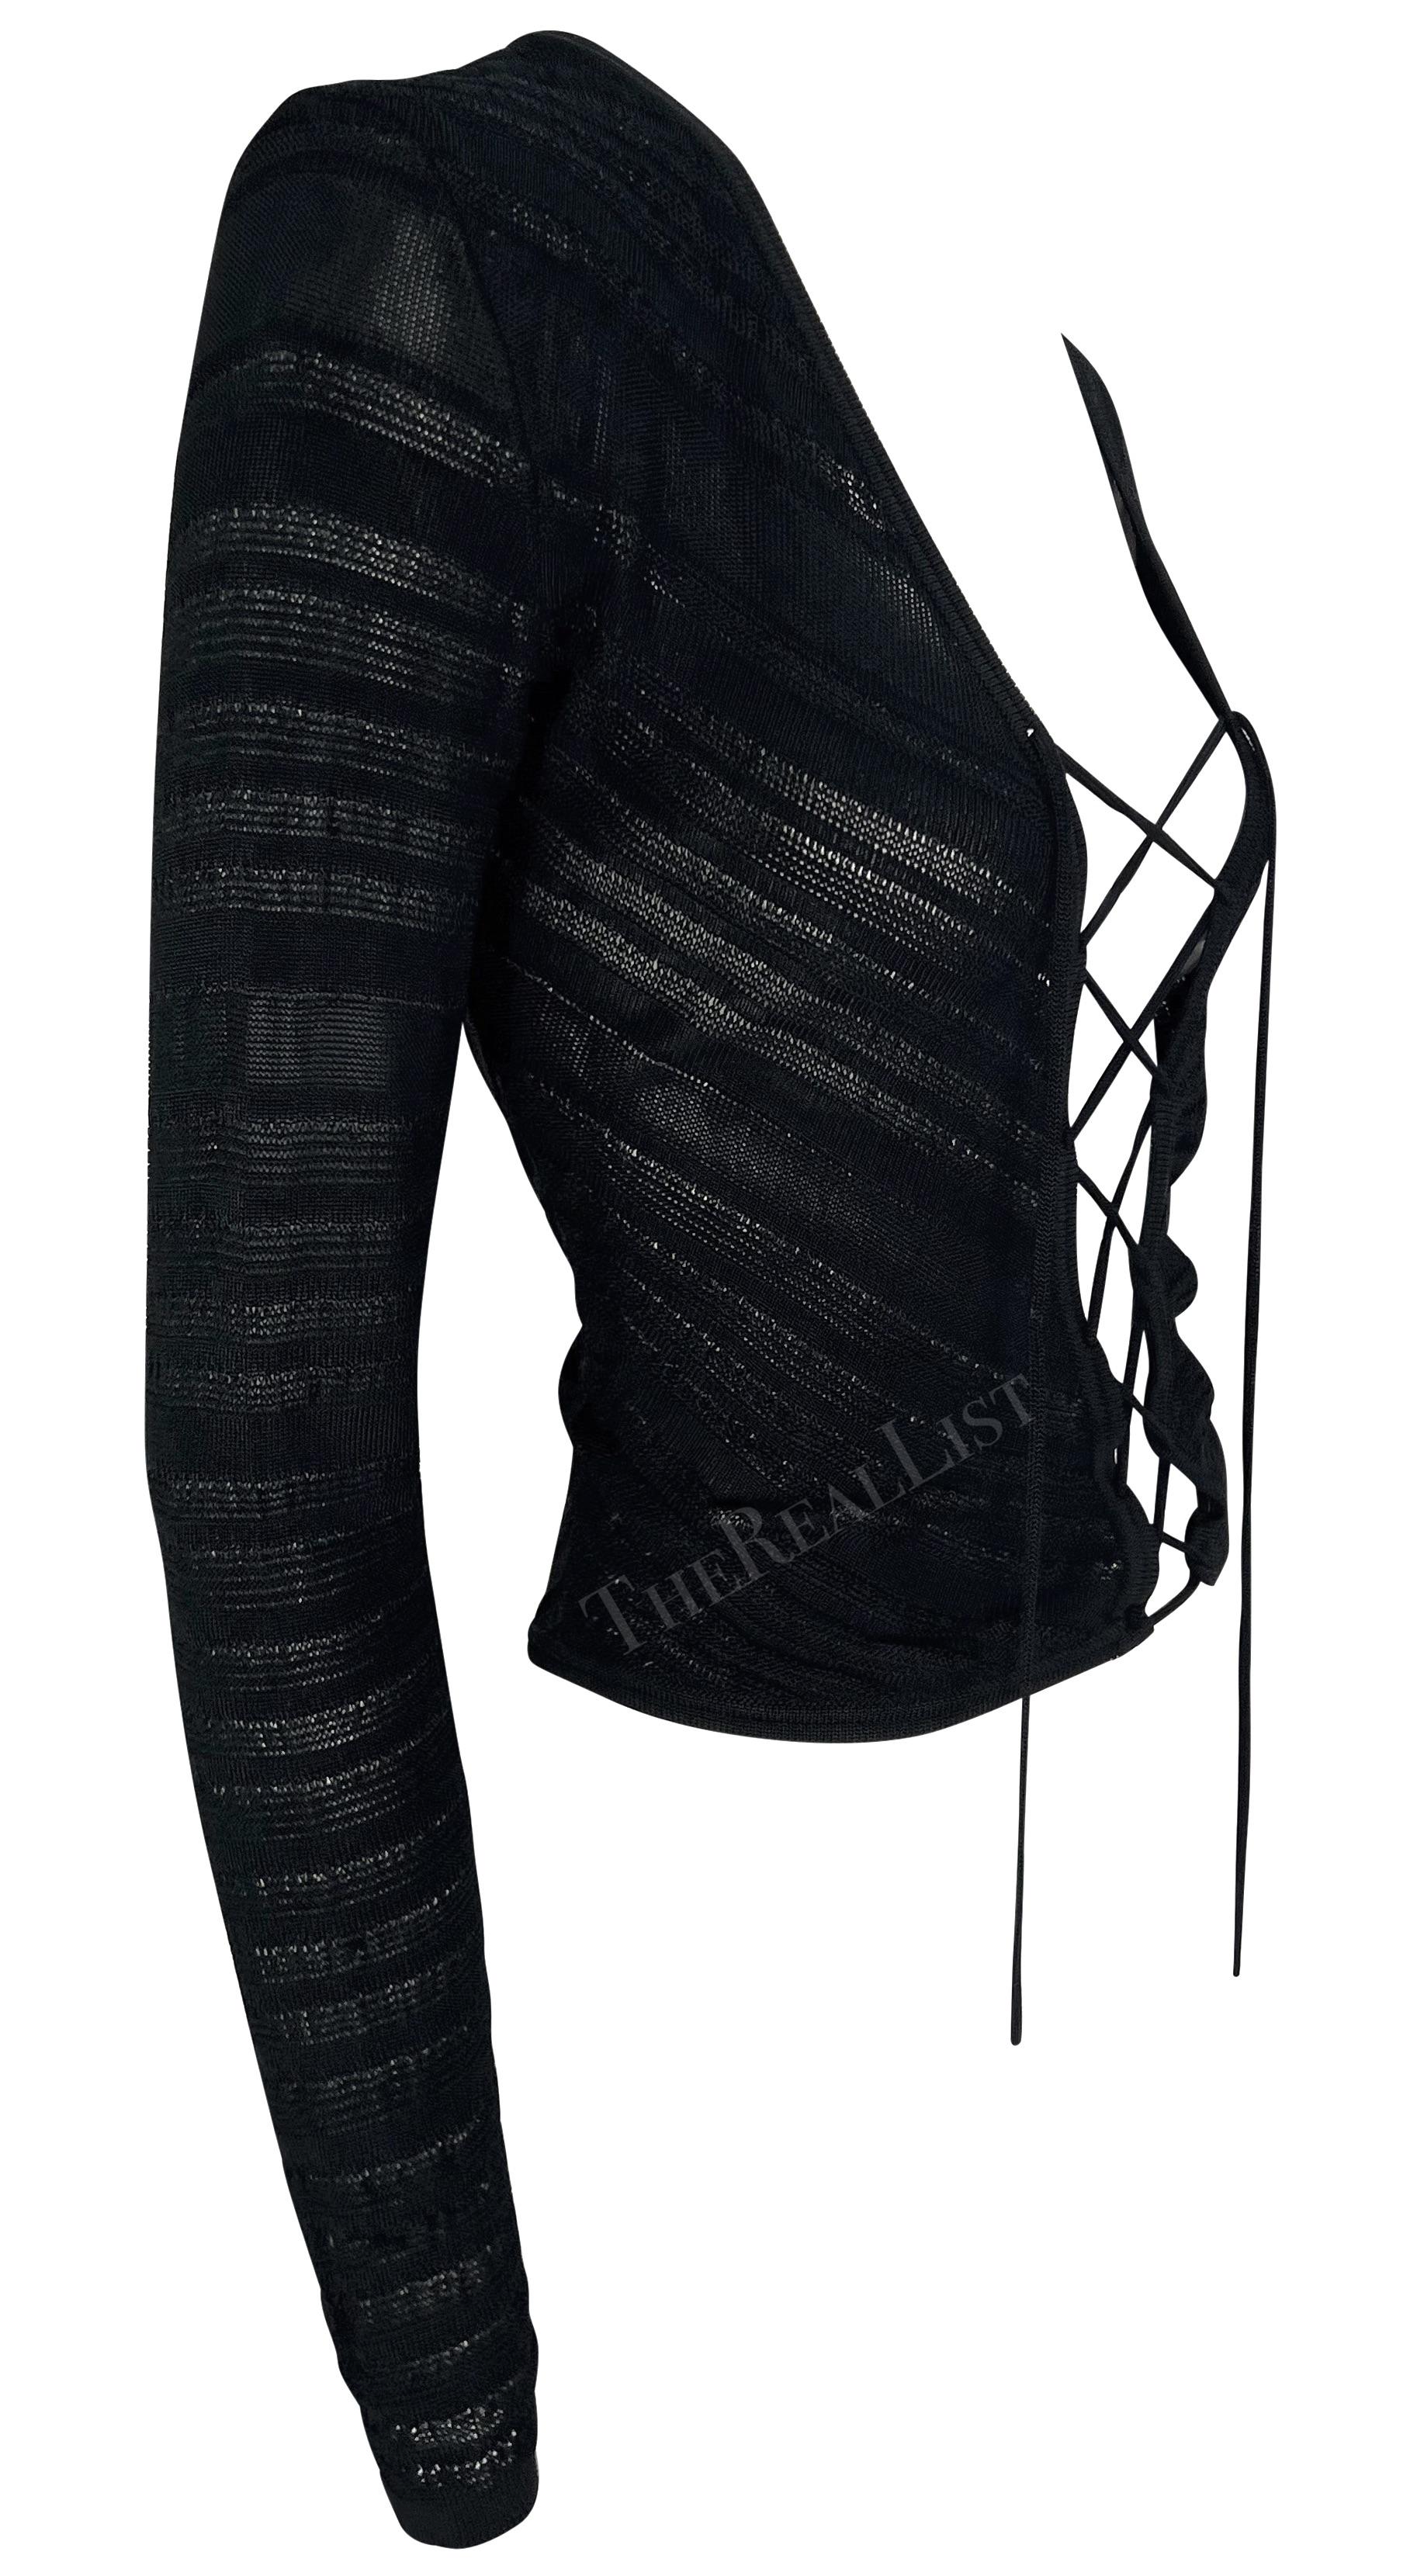 S/S 2002 Gianni Versace by Donatella Sheer Stretch Plunging Black Lace-Up Top In Good Condition For Sale In West Hollywood, CA